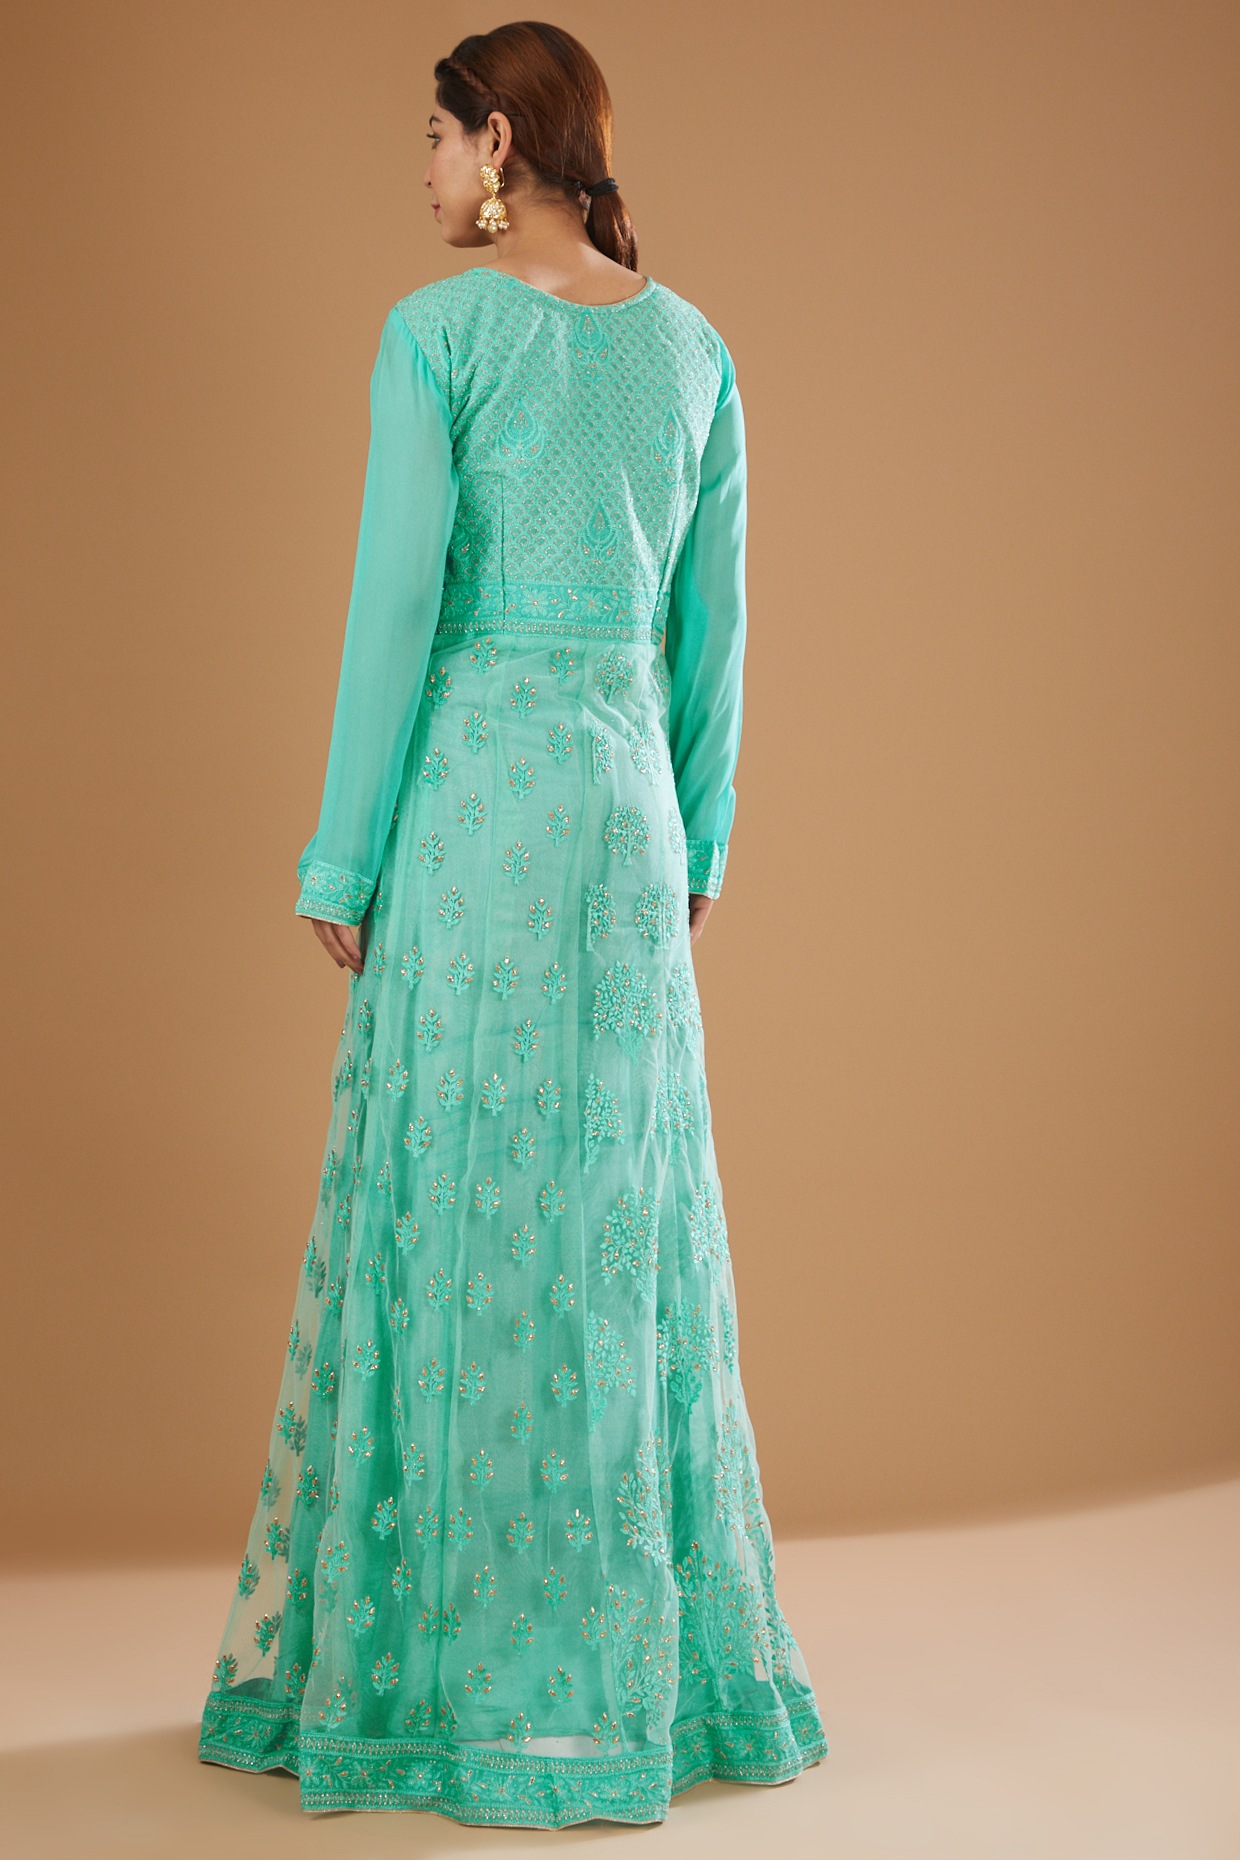 Simnnani Fashion - Sea Green Color Designer Long Gown #kurties  #kurtiesdesign #kurtiespettern #kurtiesindian #kurtiescoldsholde… | Gowns,  Dress, Party wear gown